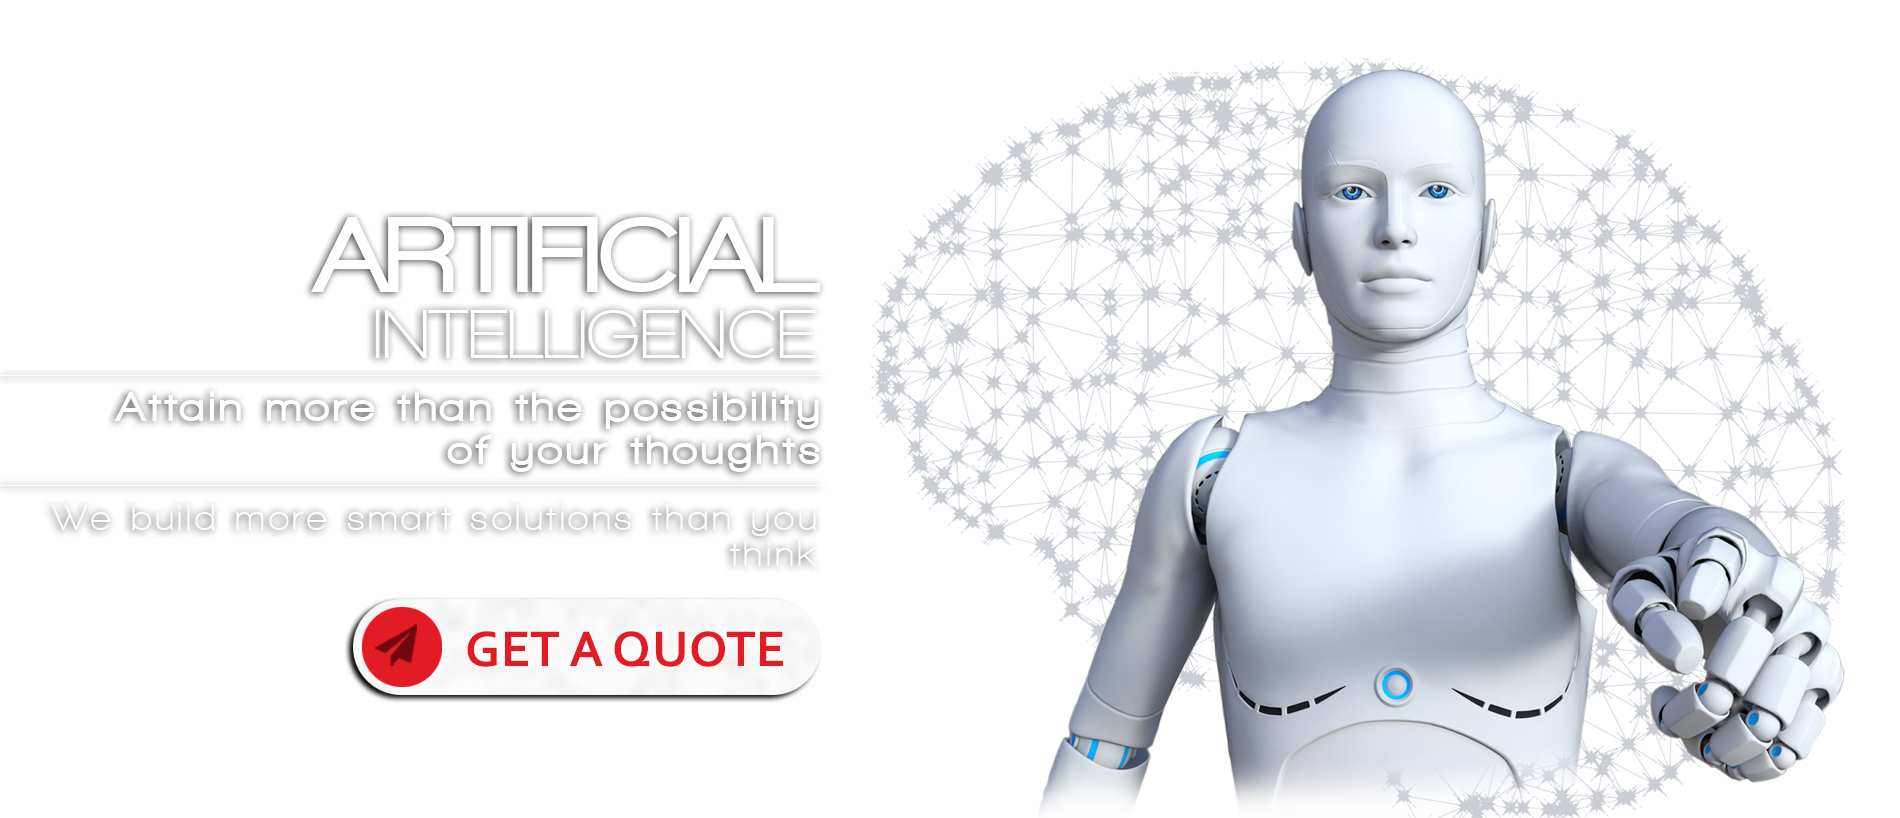 Artificial intelligence services